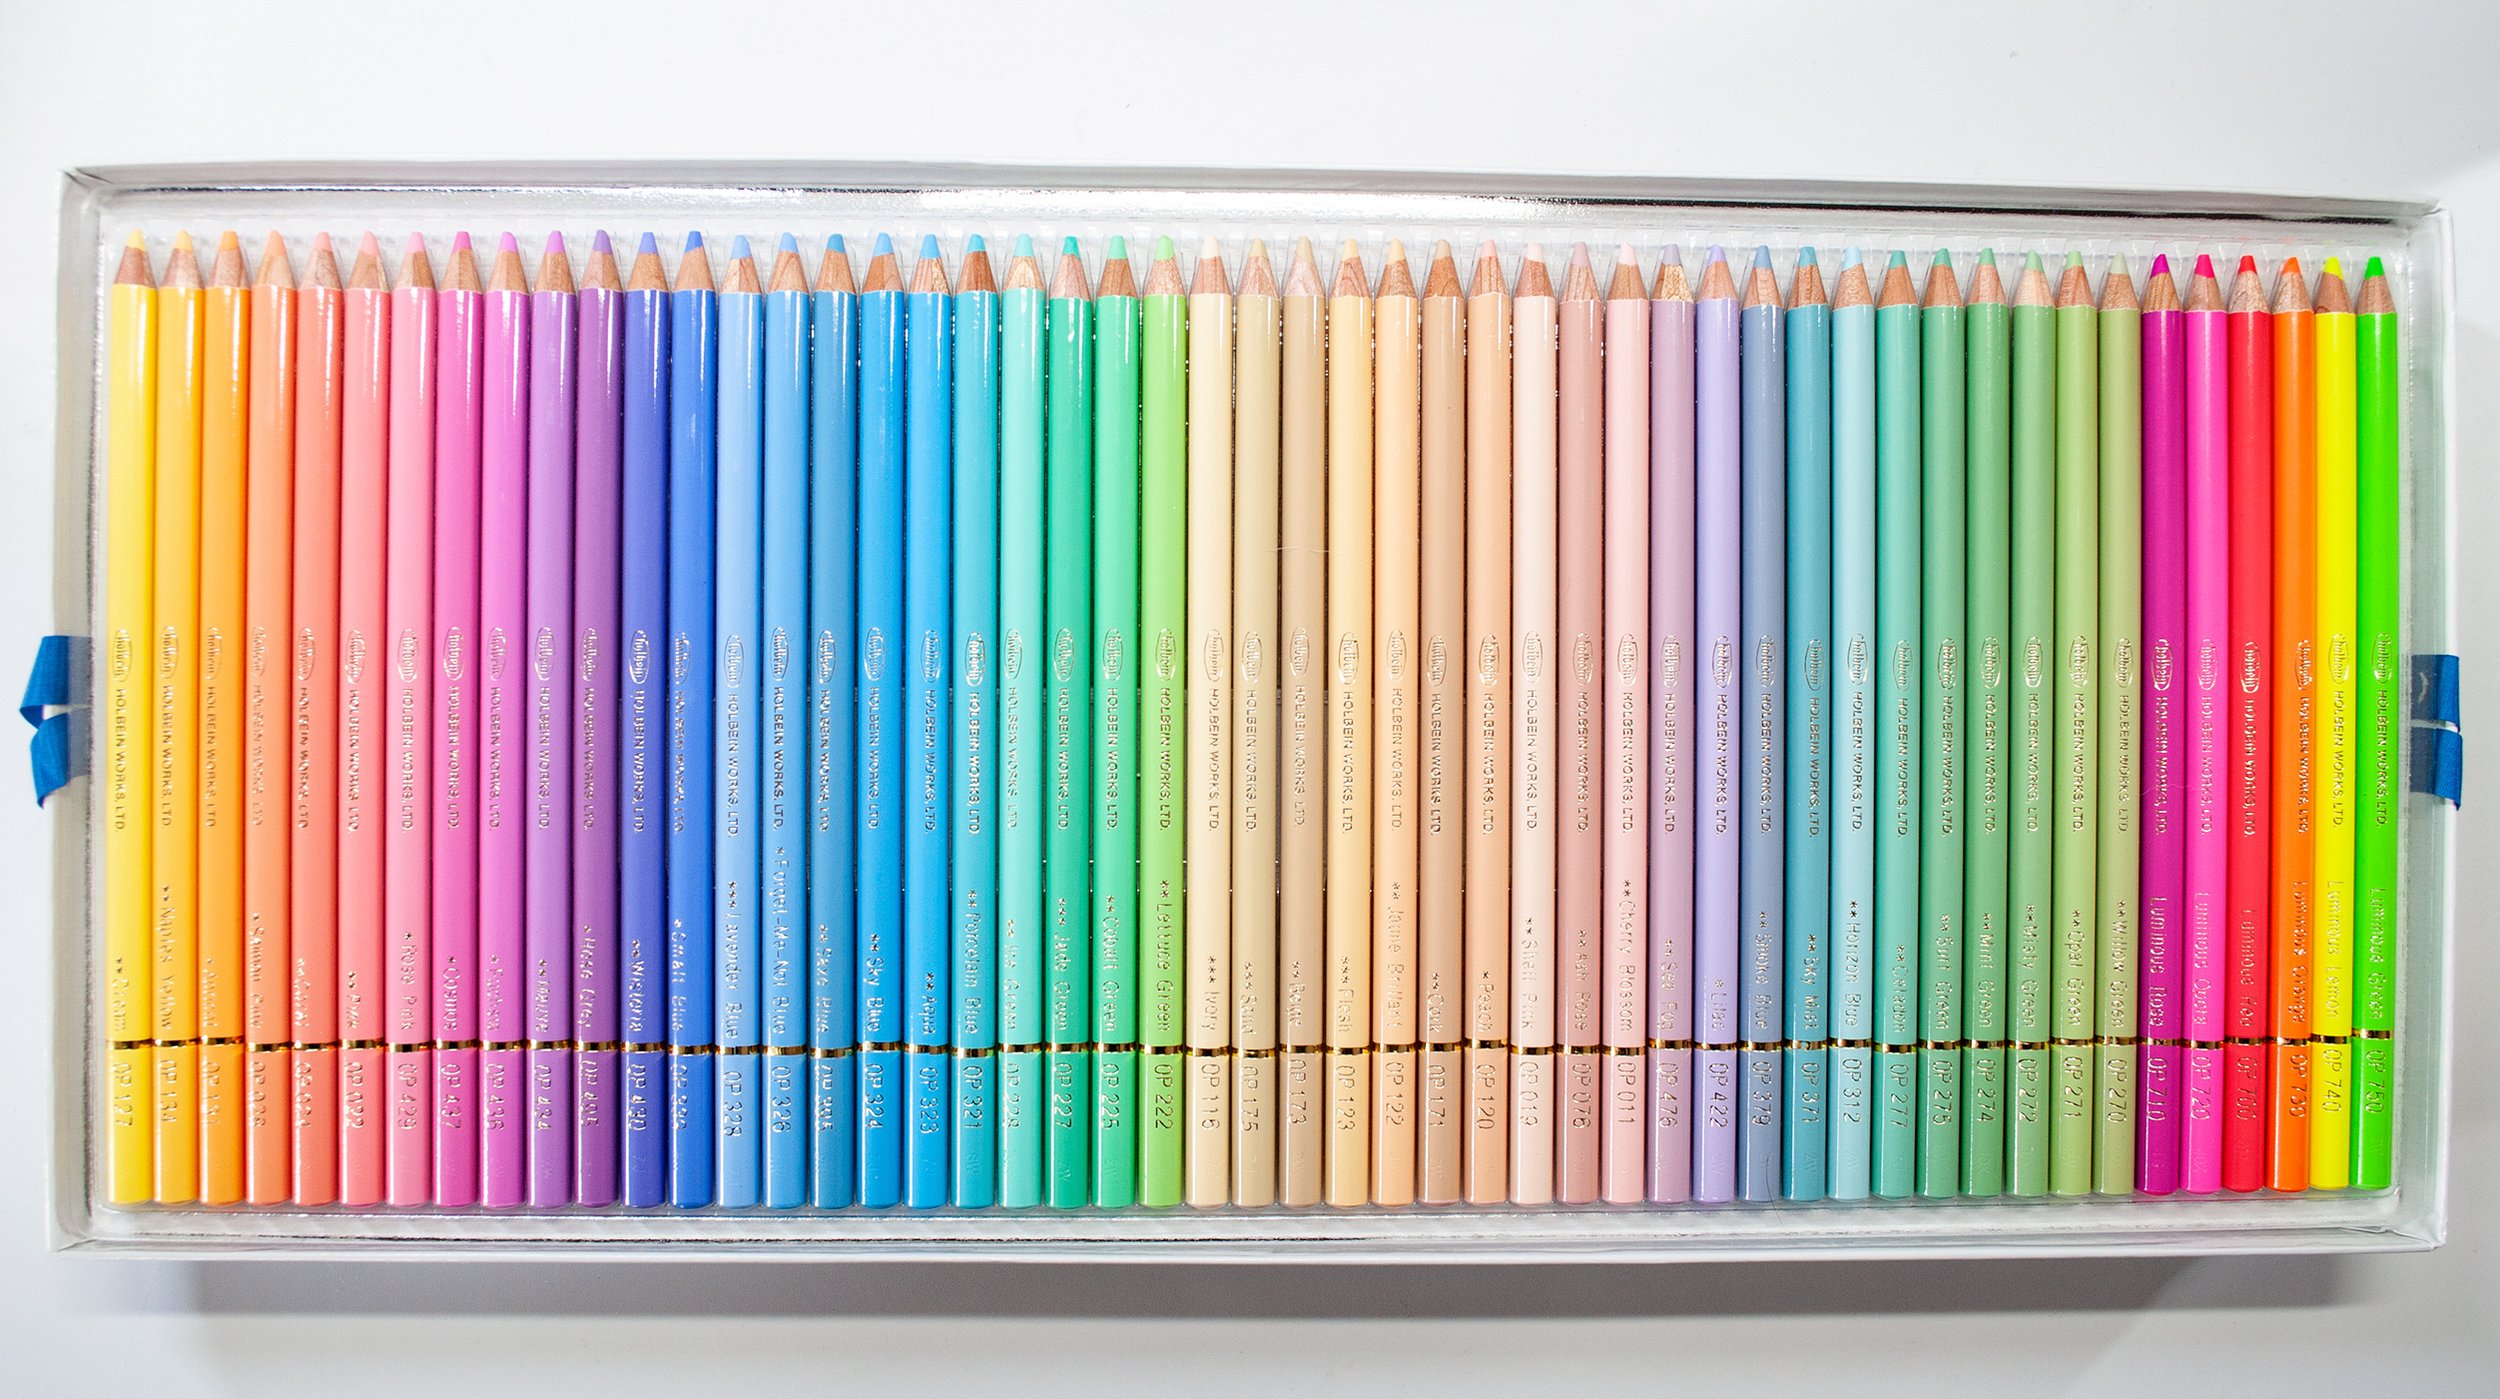 The BEST Holbein ALTERNATIVES: PASTEL Colored Pencils! (Pastelowe